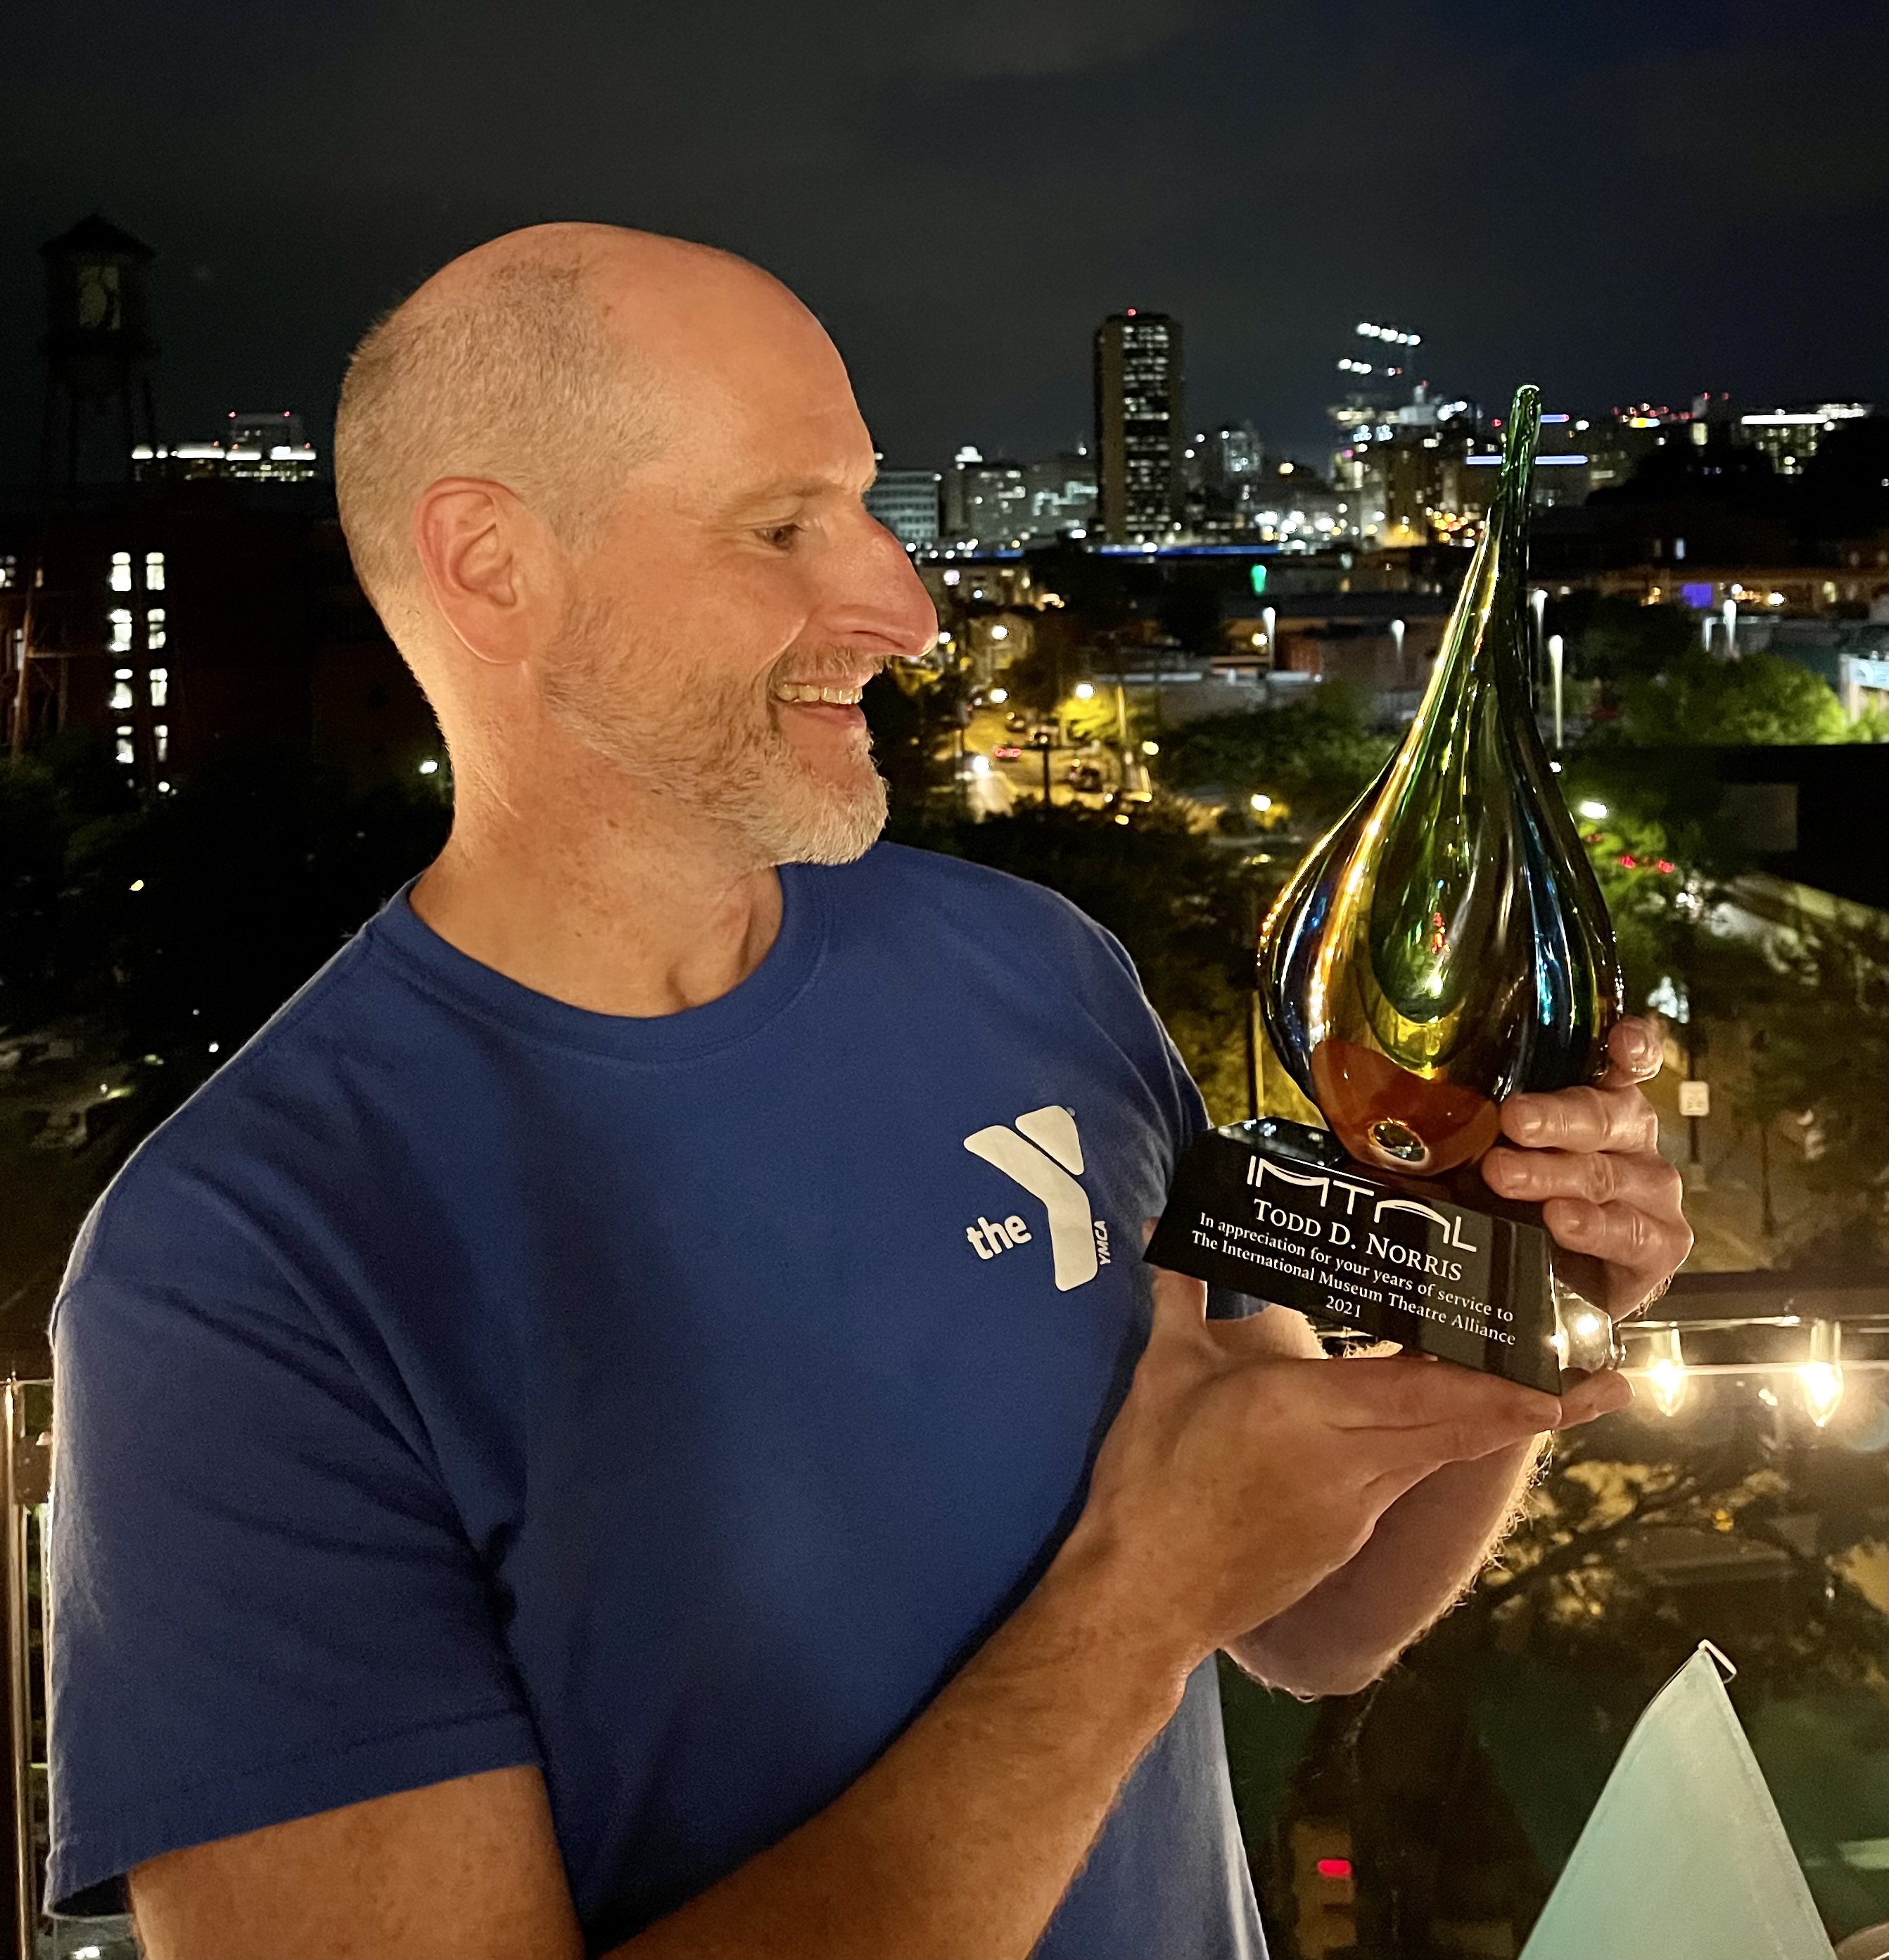 photo is Todd D. Norris holding a glass recognition award. He is standing on a balcony overlooking the city of Richmond, VA at night.